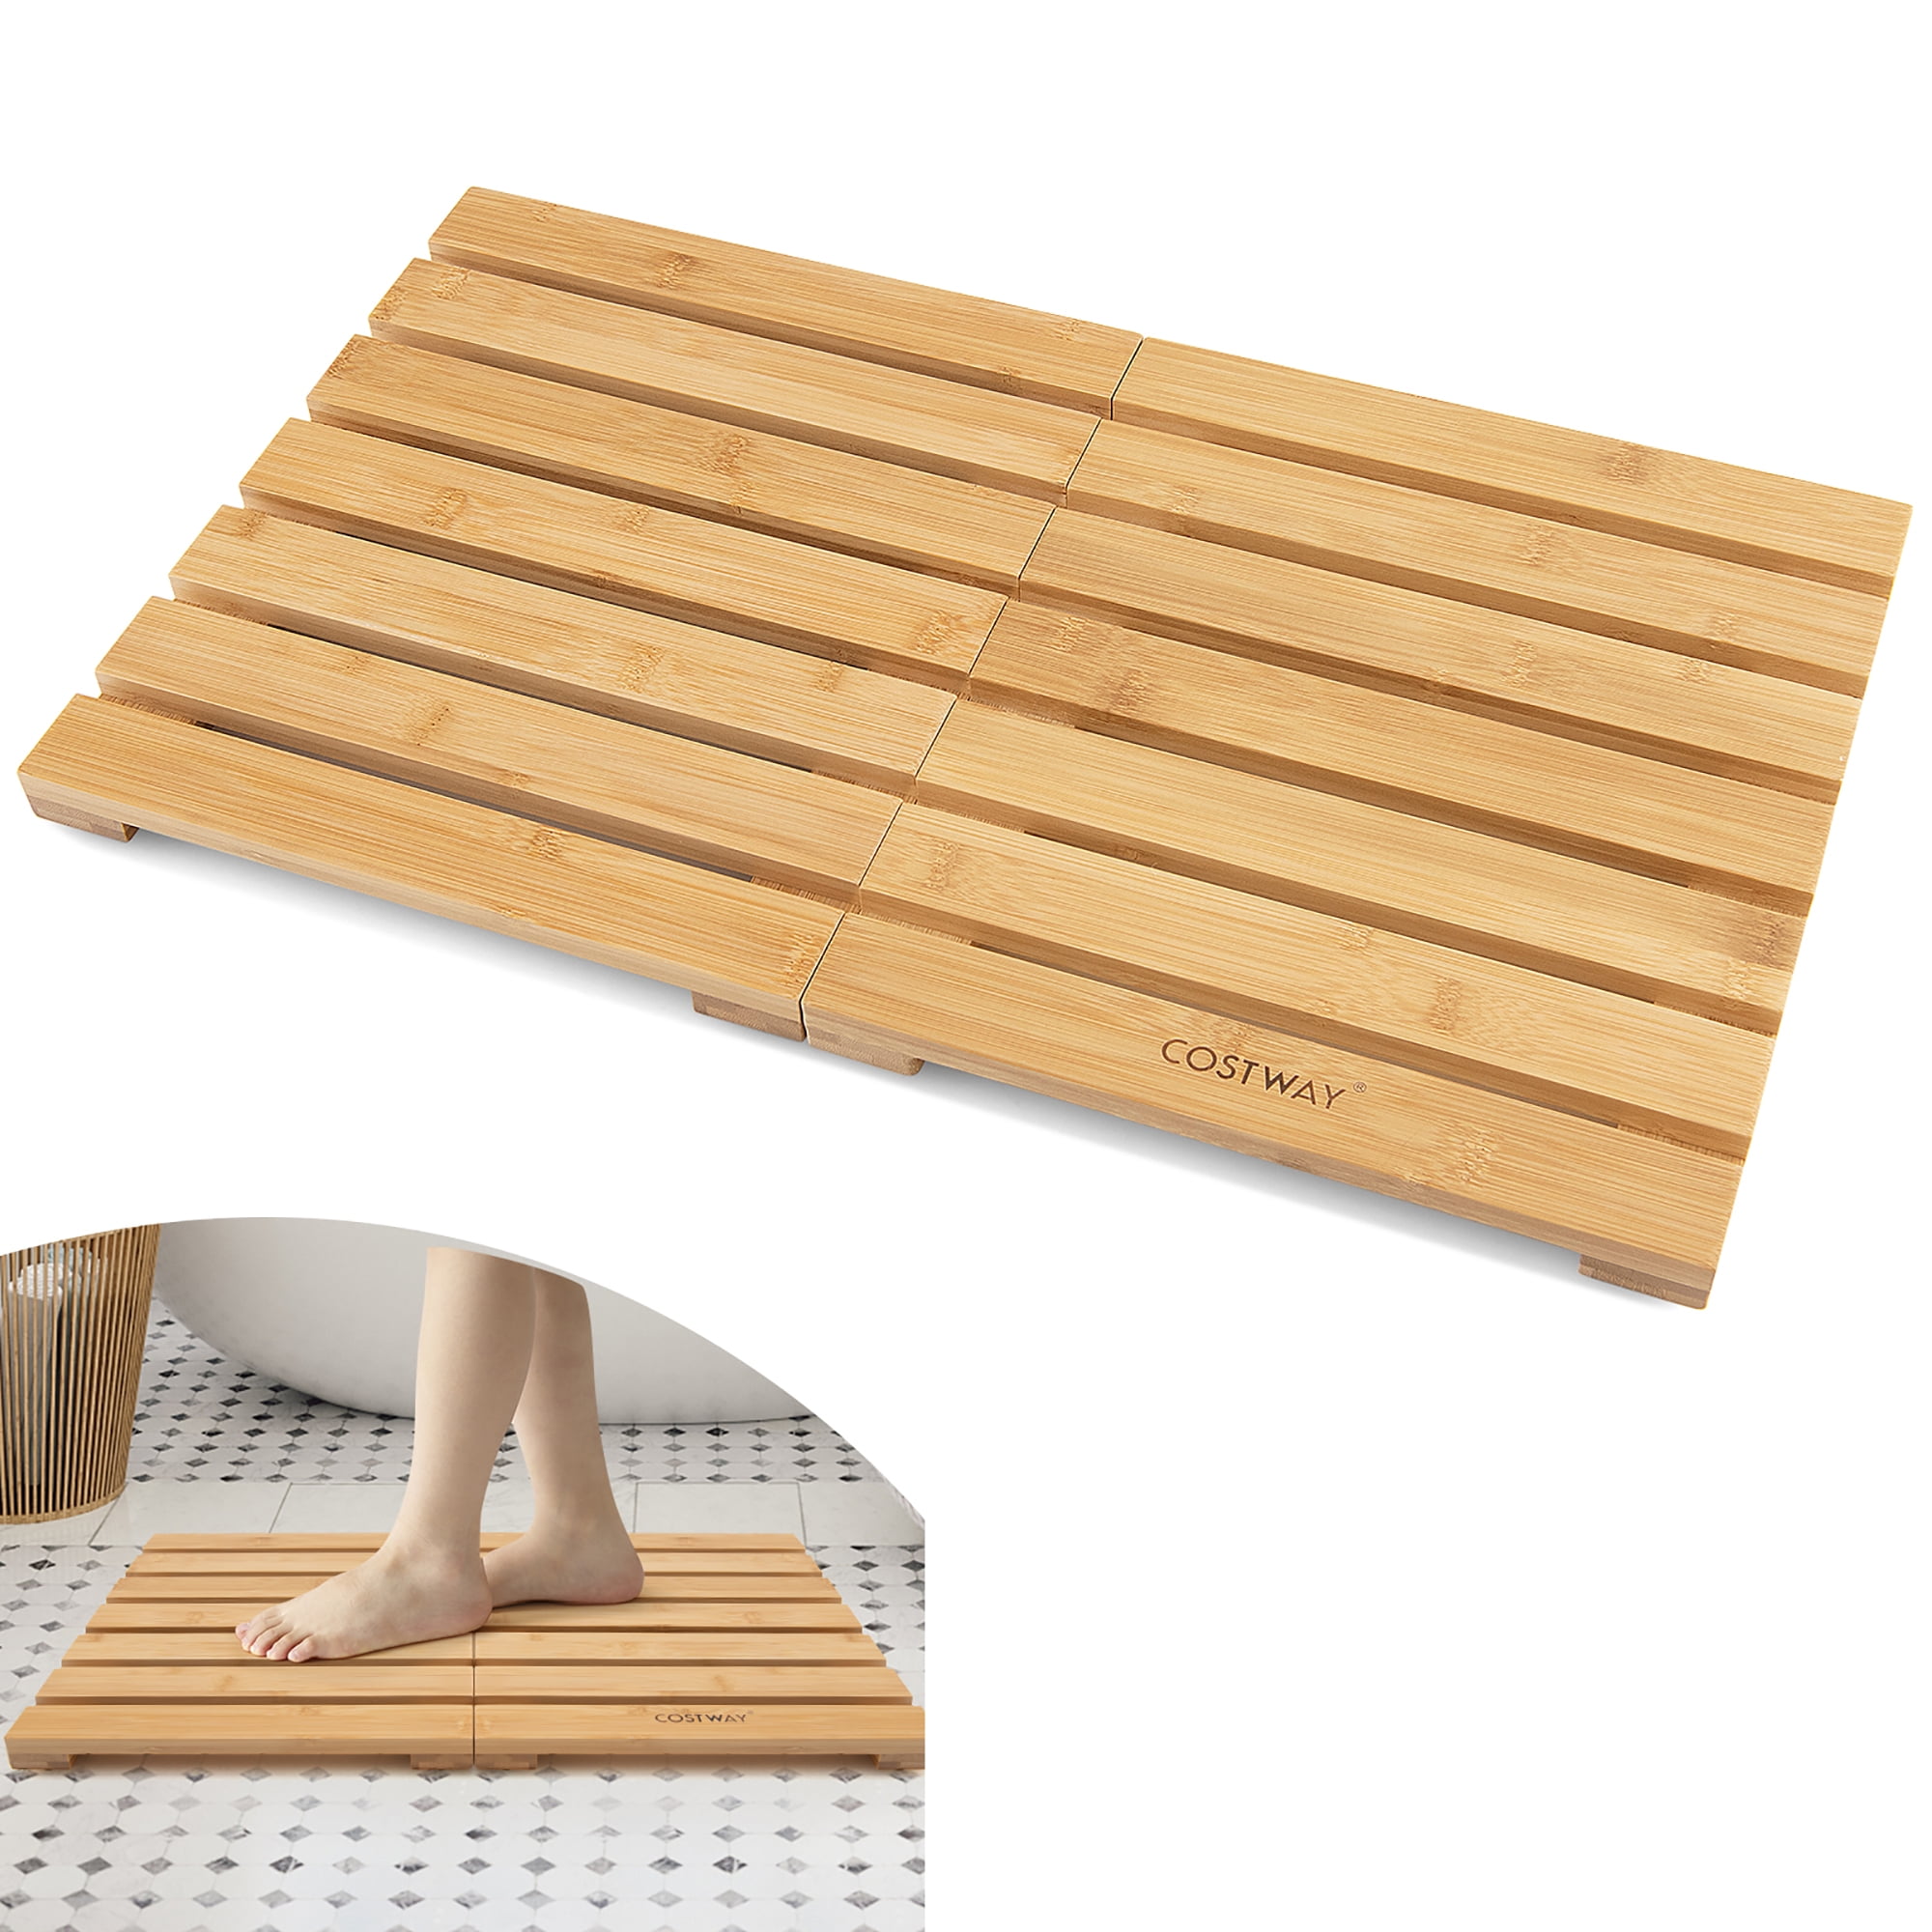  SereneLife Bamboo Bath Mat Floor Rug - Waterproof and Weather  Resistant Natural Wood Bathroom Shower Foot Carpet with Multi-Panel Strip  Foldable Roll Up Non Slip Fabric for Indoor Use - SLFBMT20 